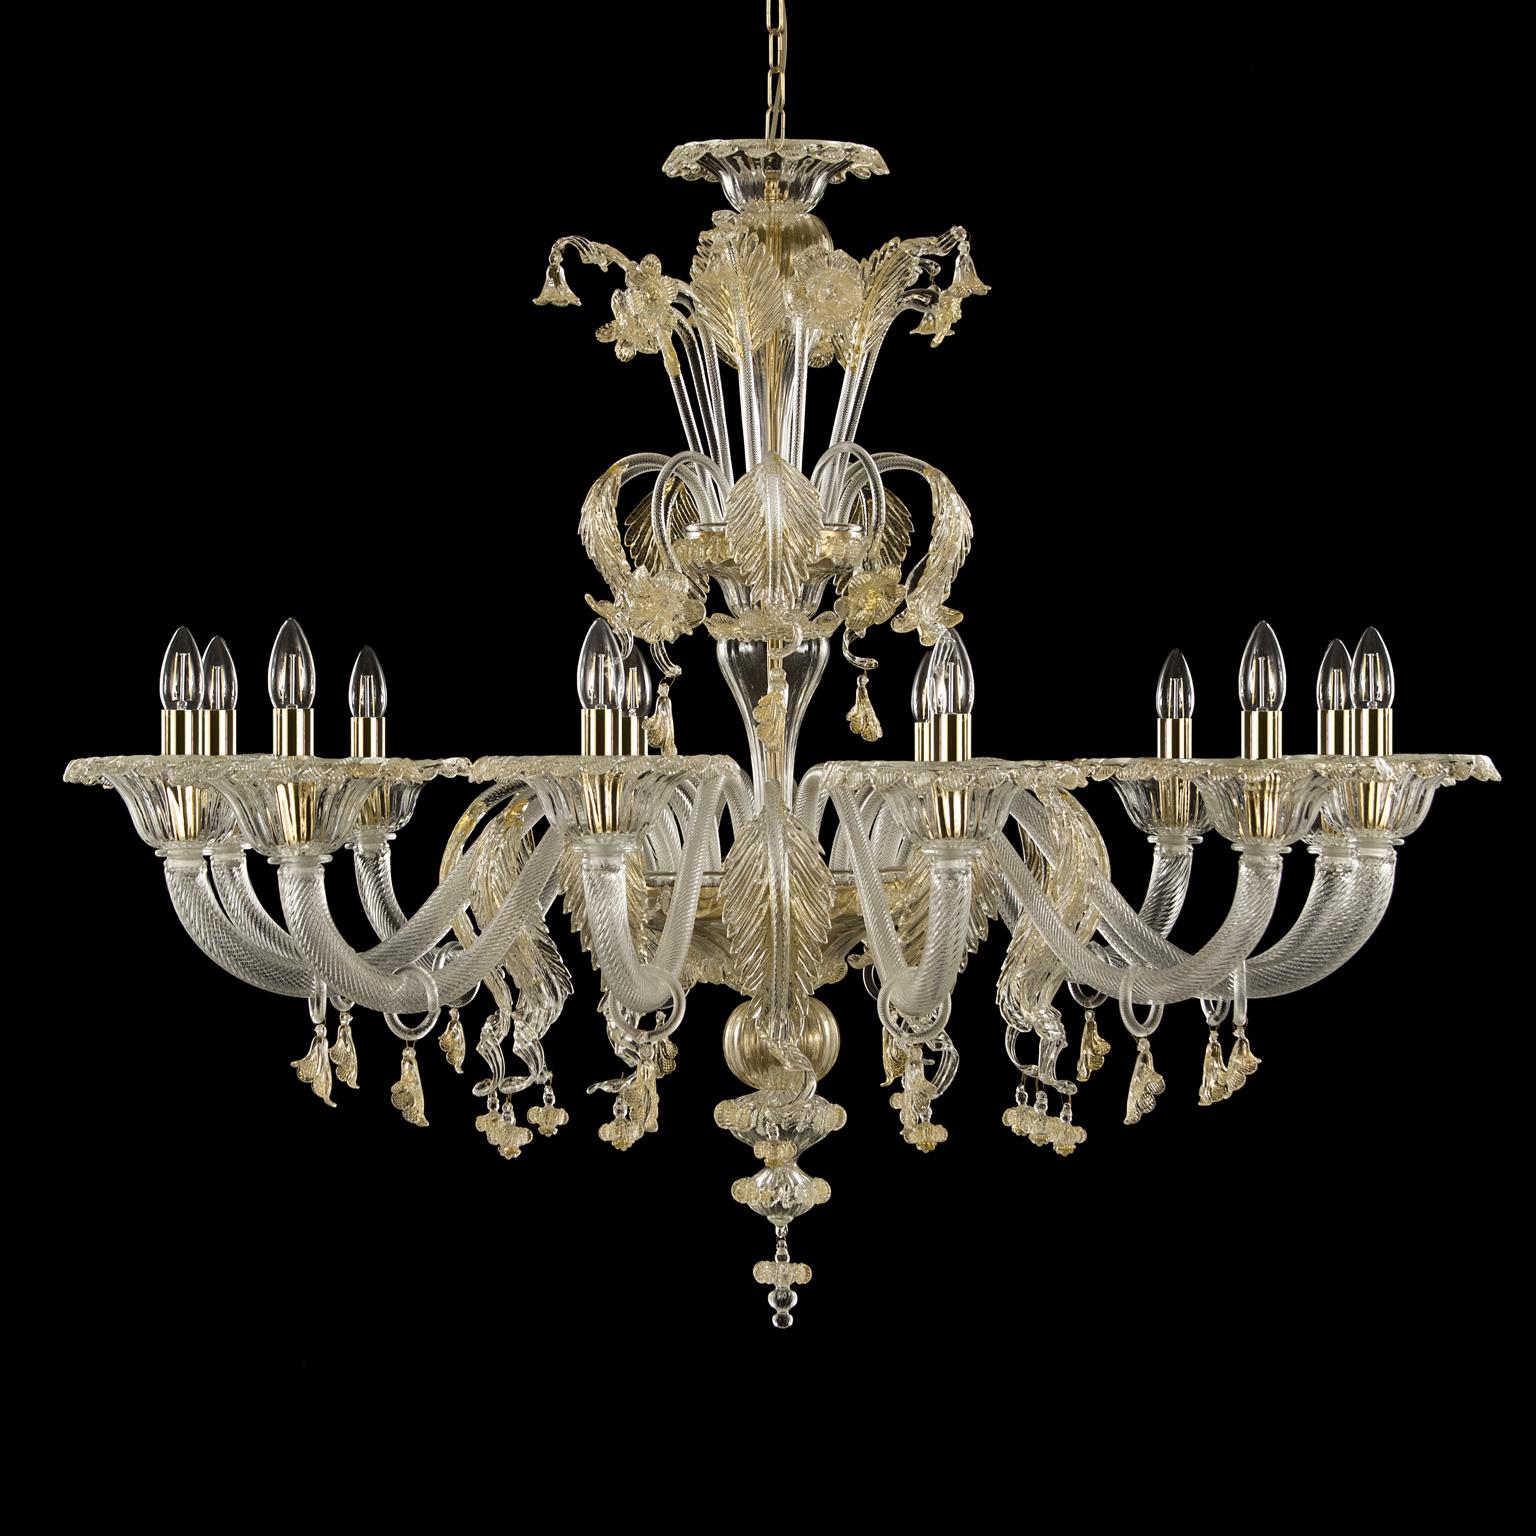 Toffee chandelier 12 arms, crystal Murano glass, gold details by Multiforme.
The artistic glass chandelier toffee is an elegant and delicate lighting work, colored with pastel tones. The structure is a combination of well proportioned volumes that